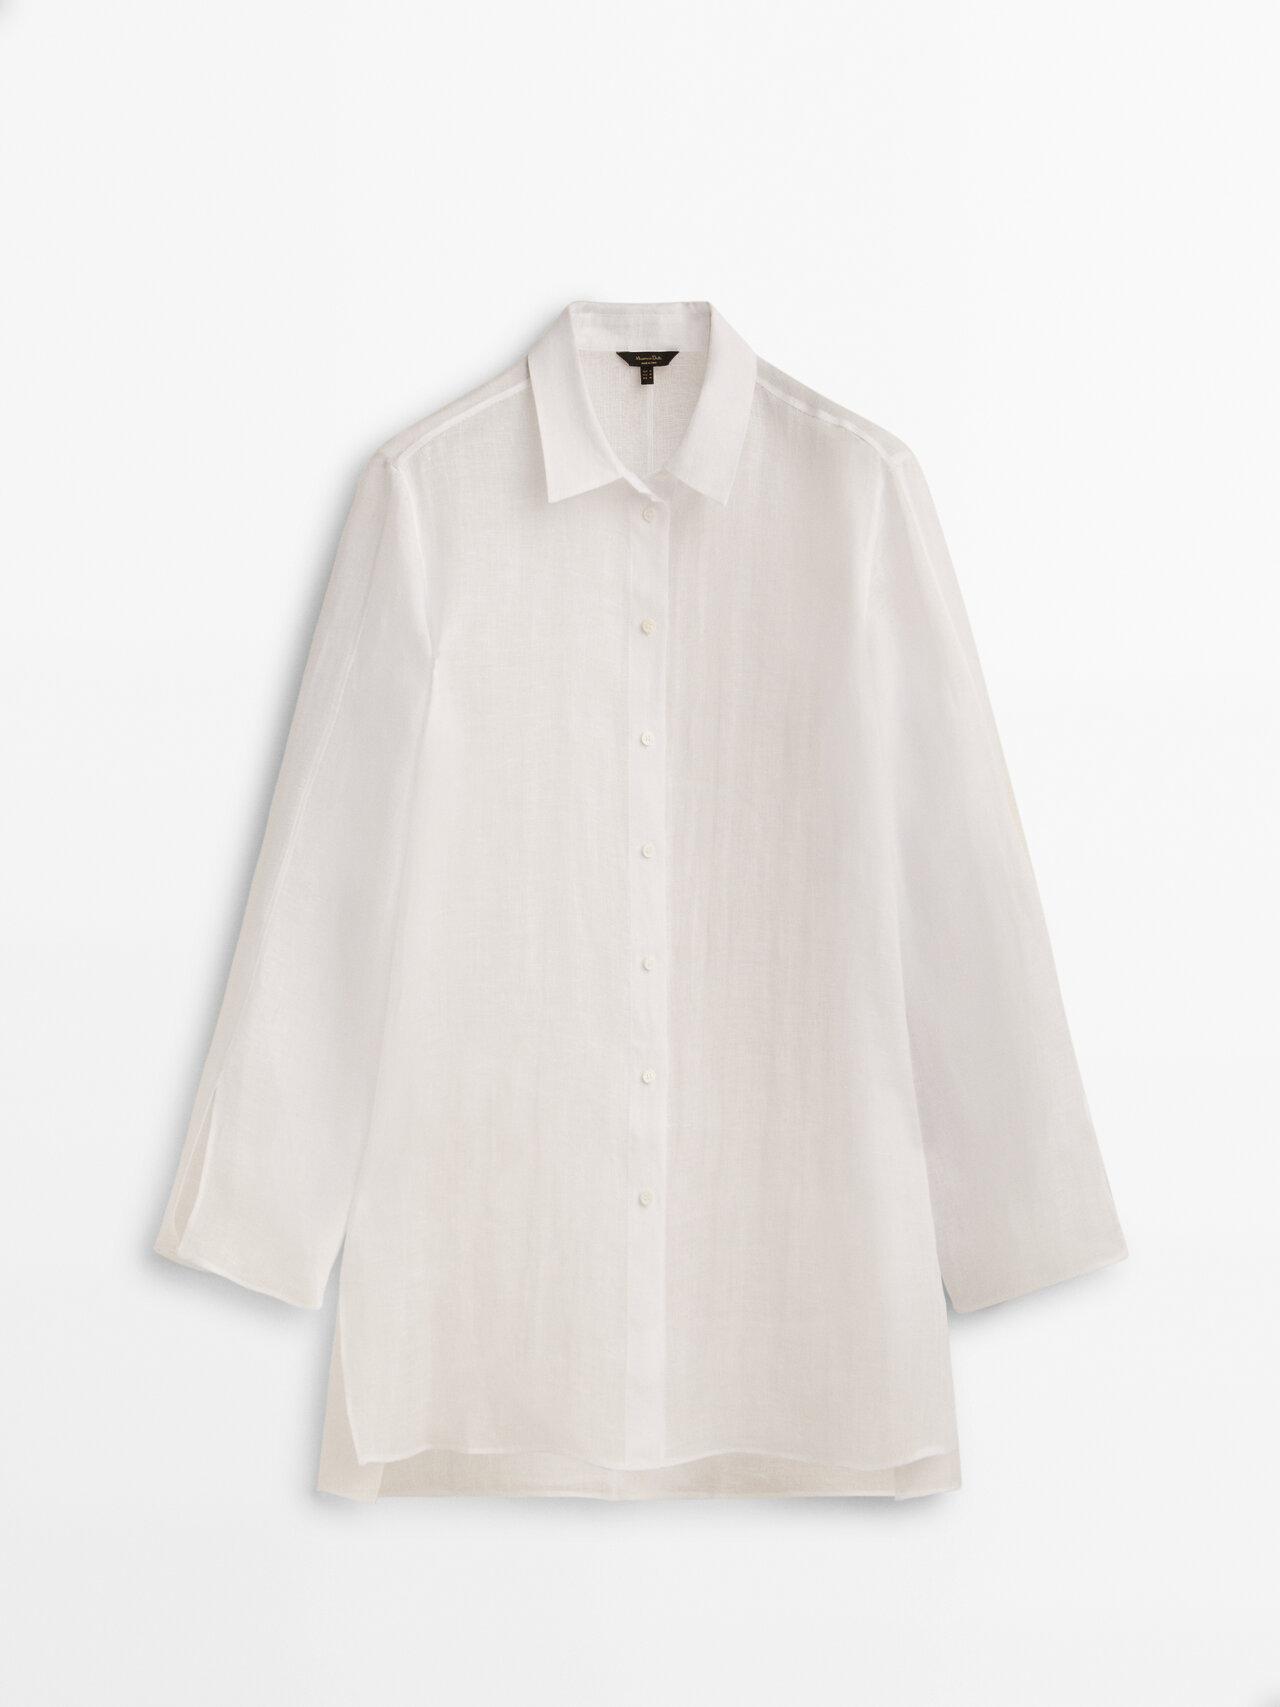 MASSIMO DUTTI Oversize Linen Blouse With Vents in White | Lyst